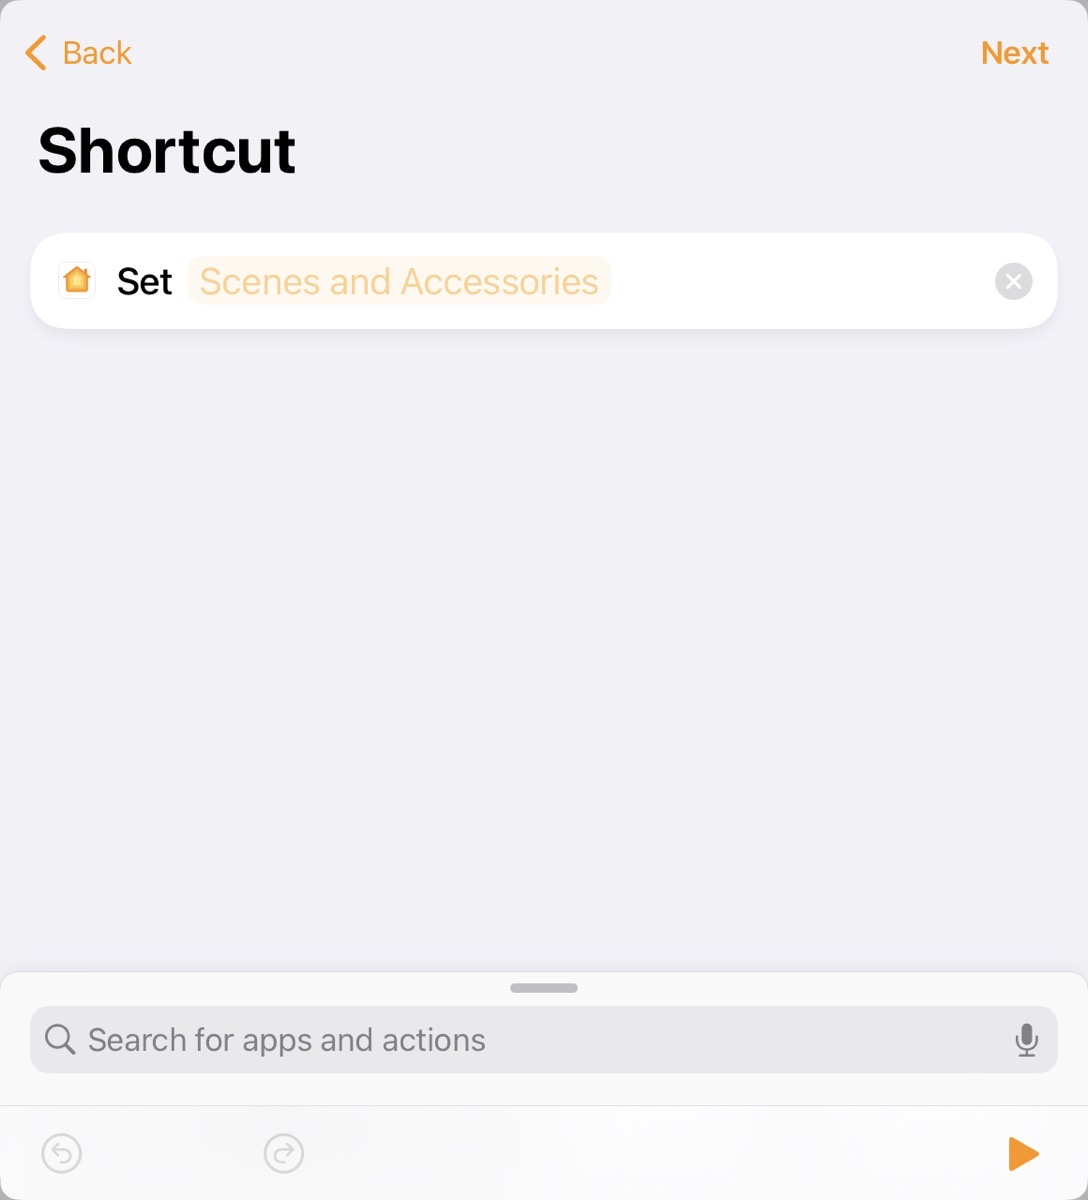 Convert to Shortcut Starting Point